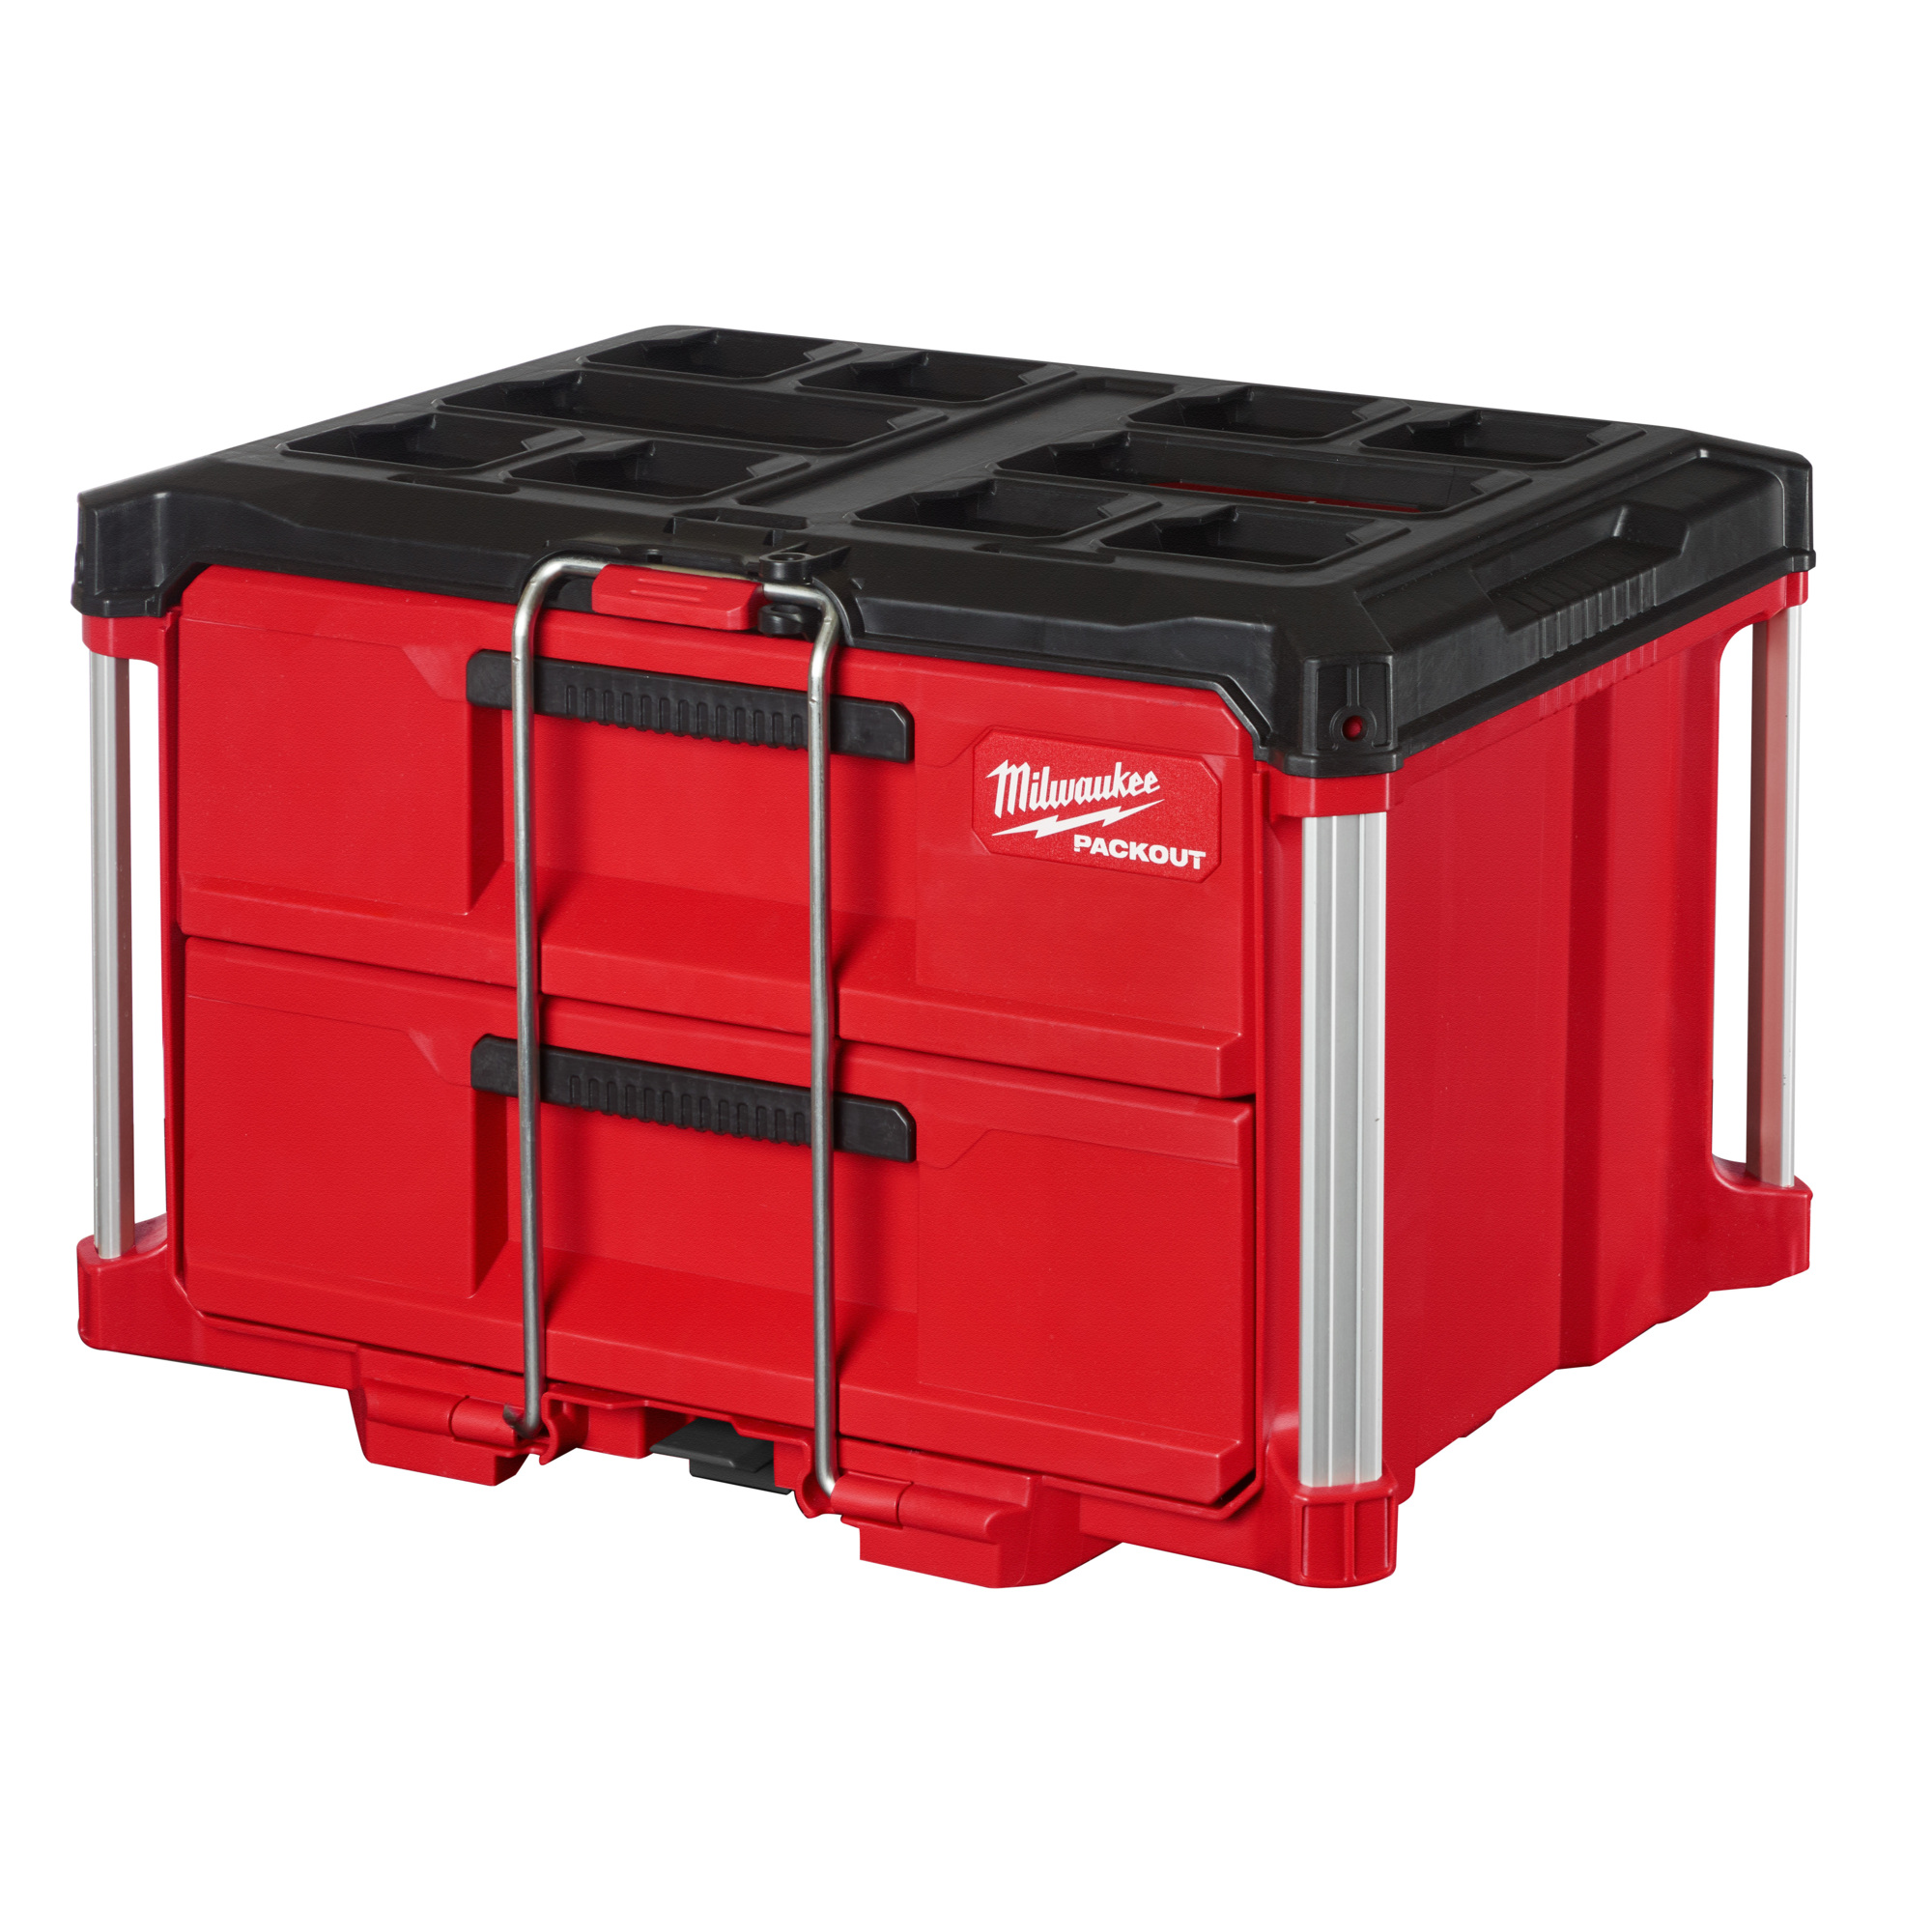 Milwaukee Packout 2-Drawer Tool Box, 16.3Inch L x 22.2Inch W x 14.3Inch H, Model 48-22-8442